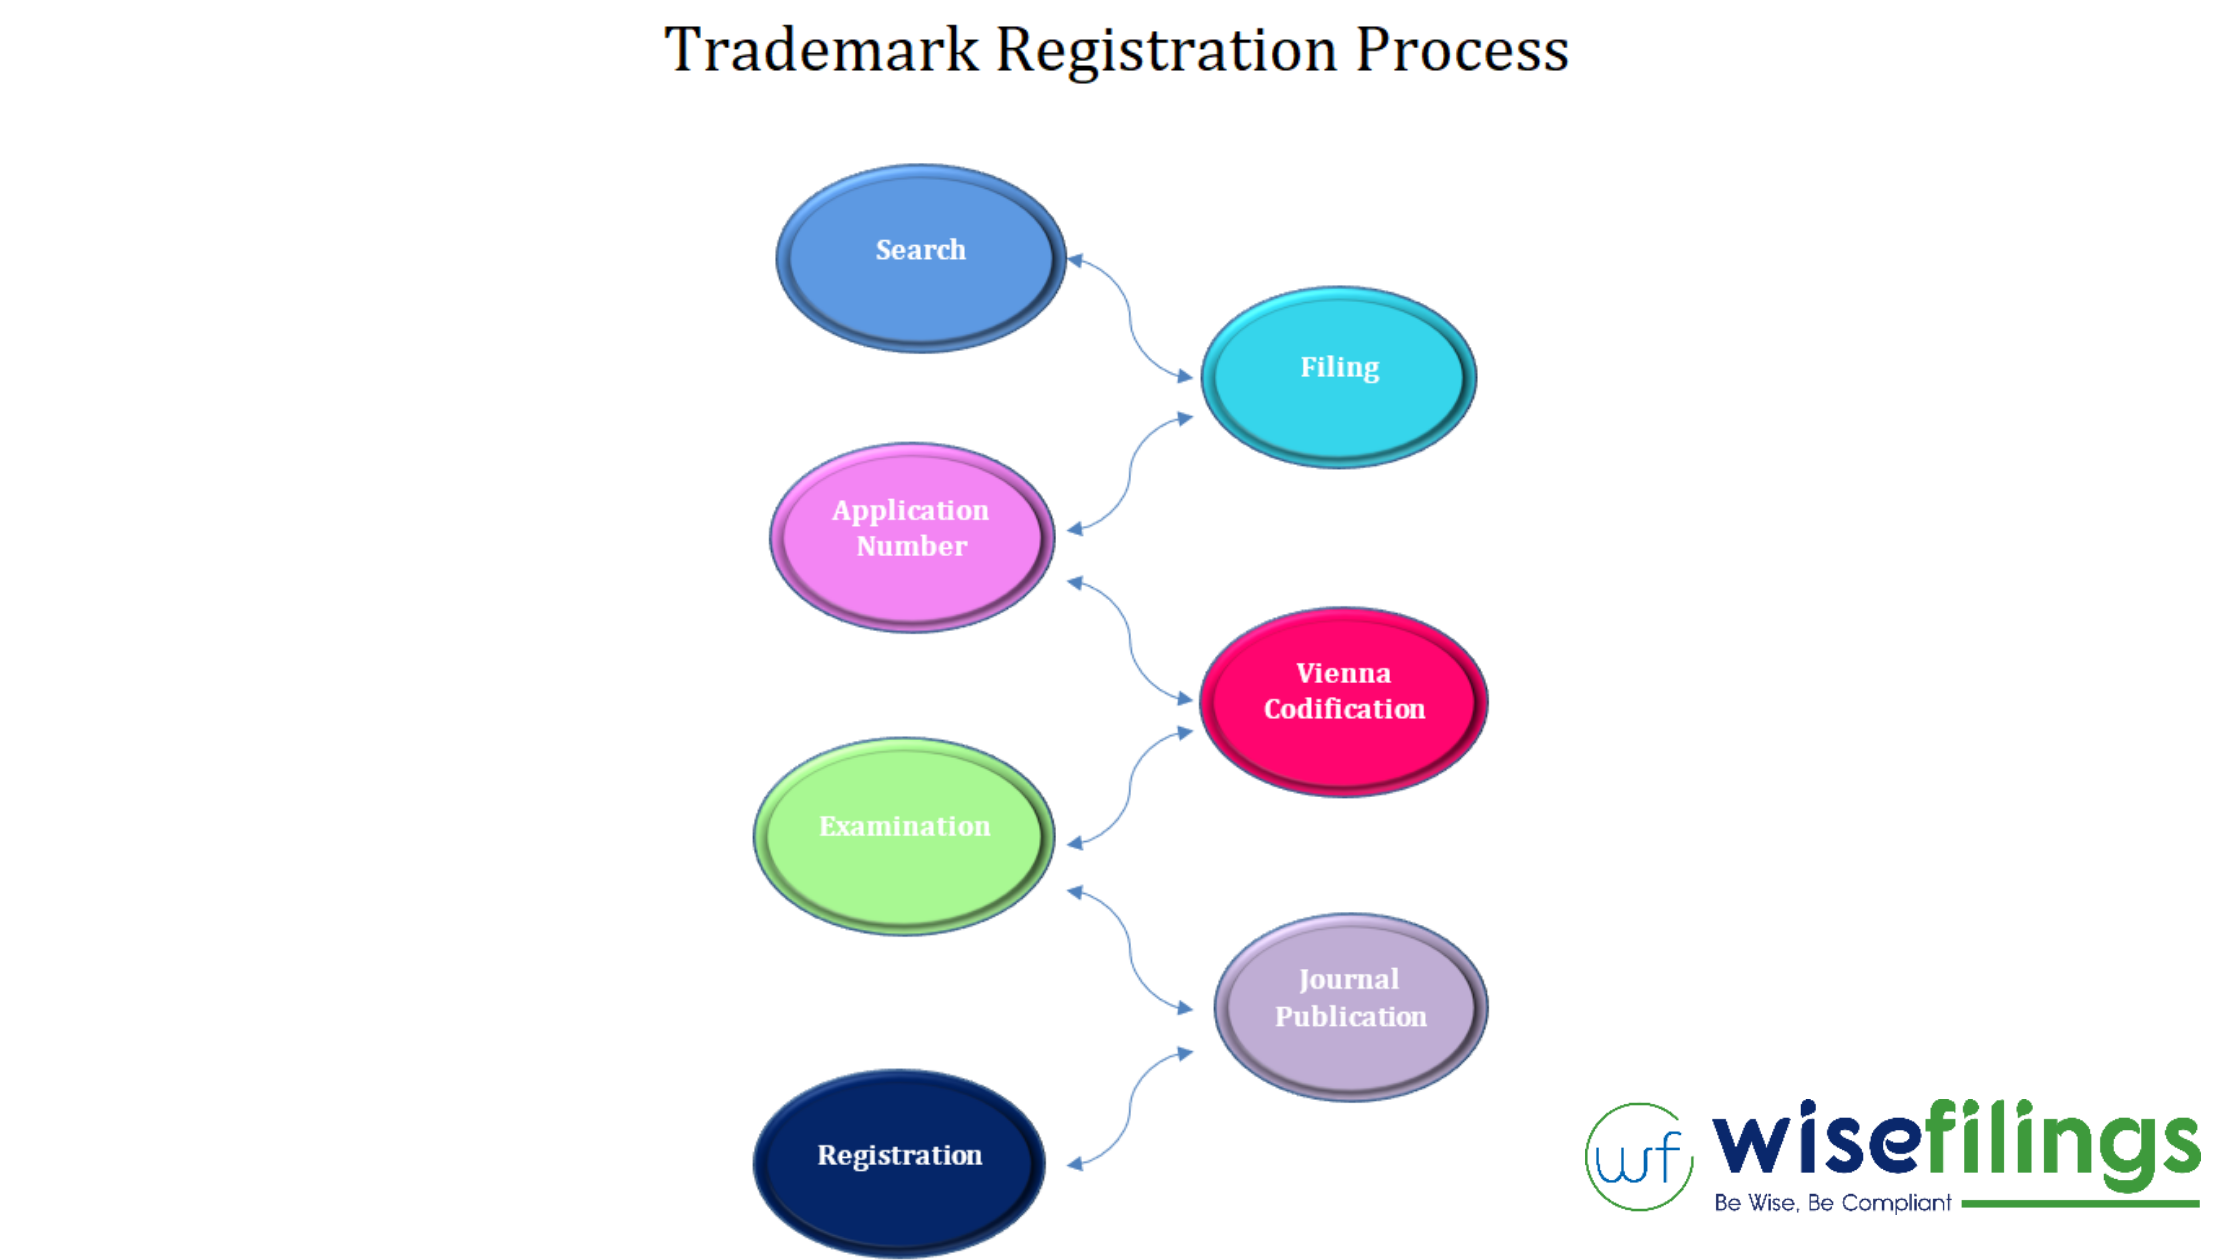 How To Register Trademark in 7 Simple Steps